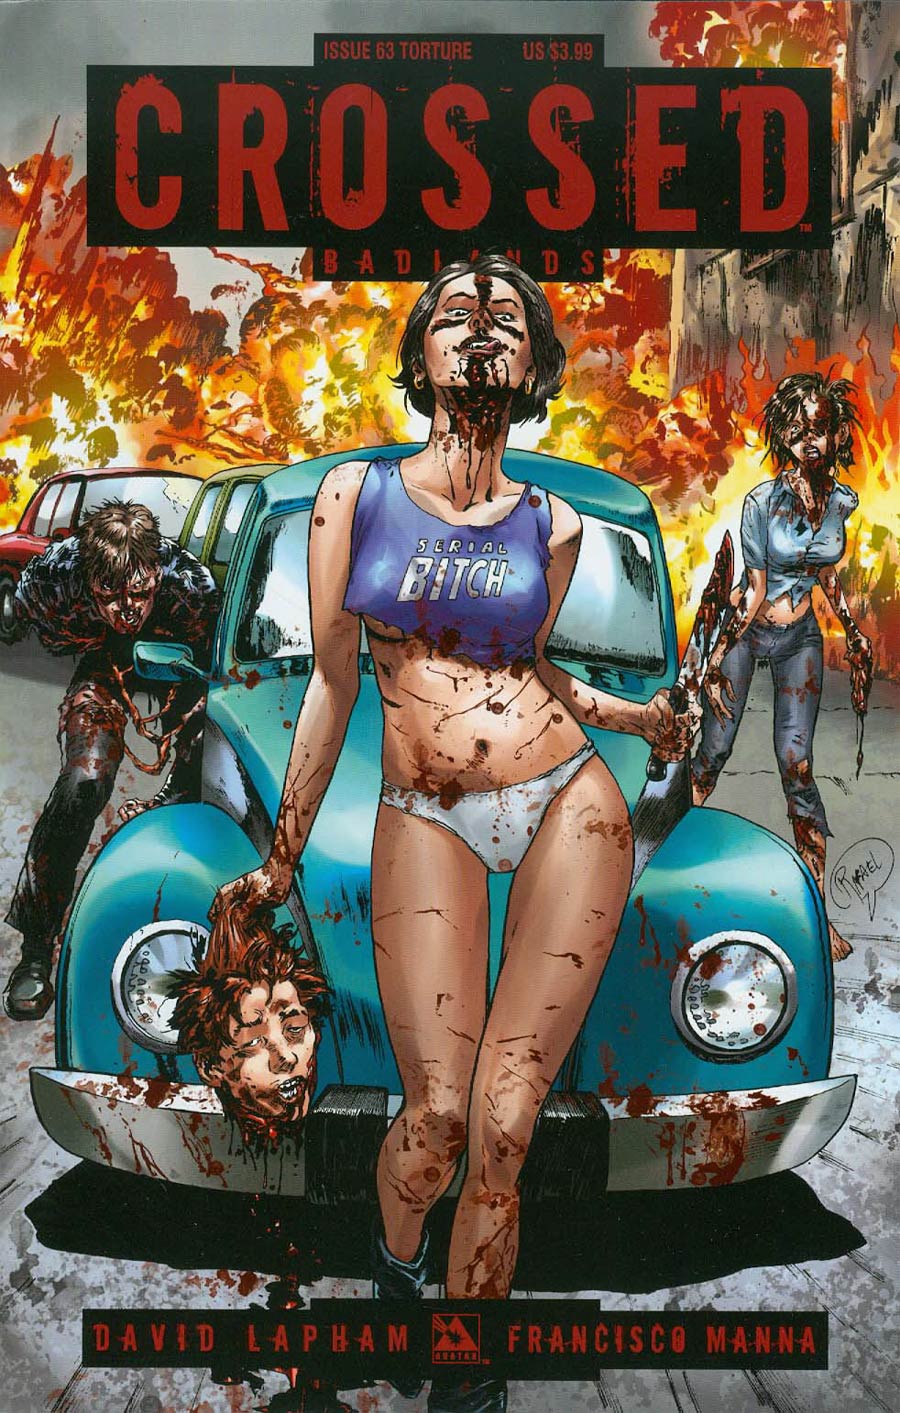 Crossed Badlands #63 Cover C Torture Cover